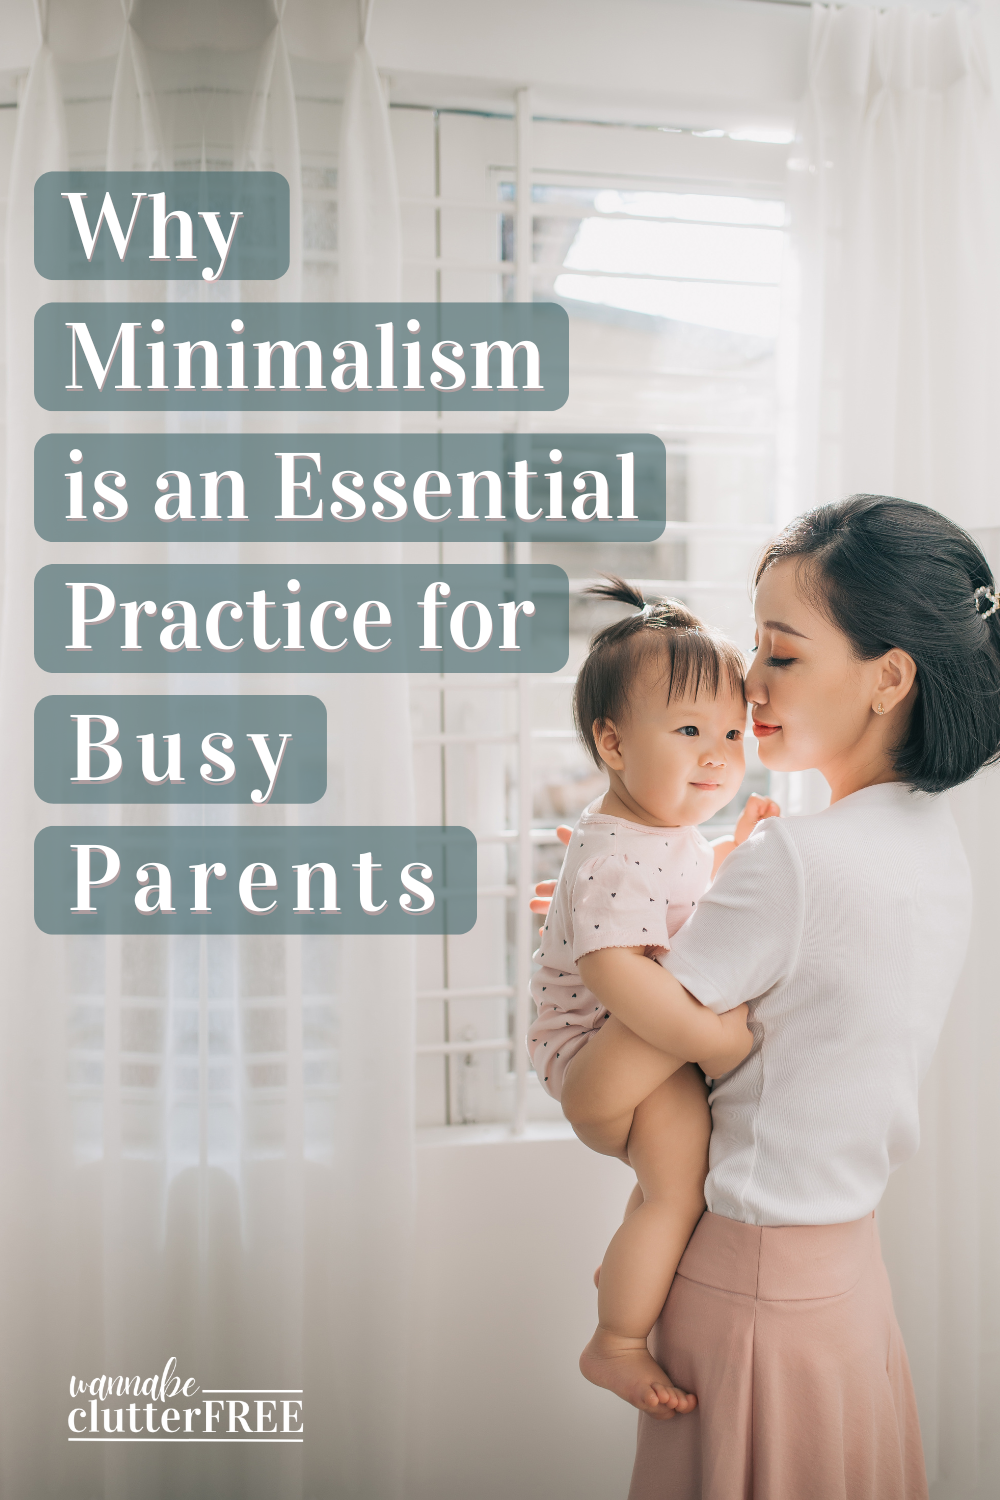 Why Minimalism is an Essential Practice for Busy Parents